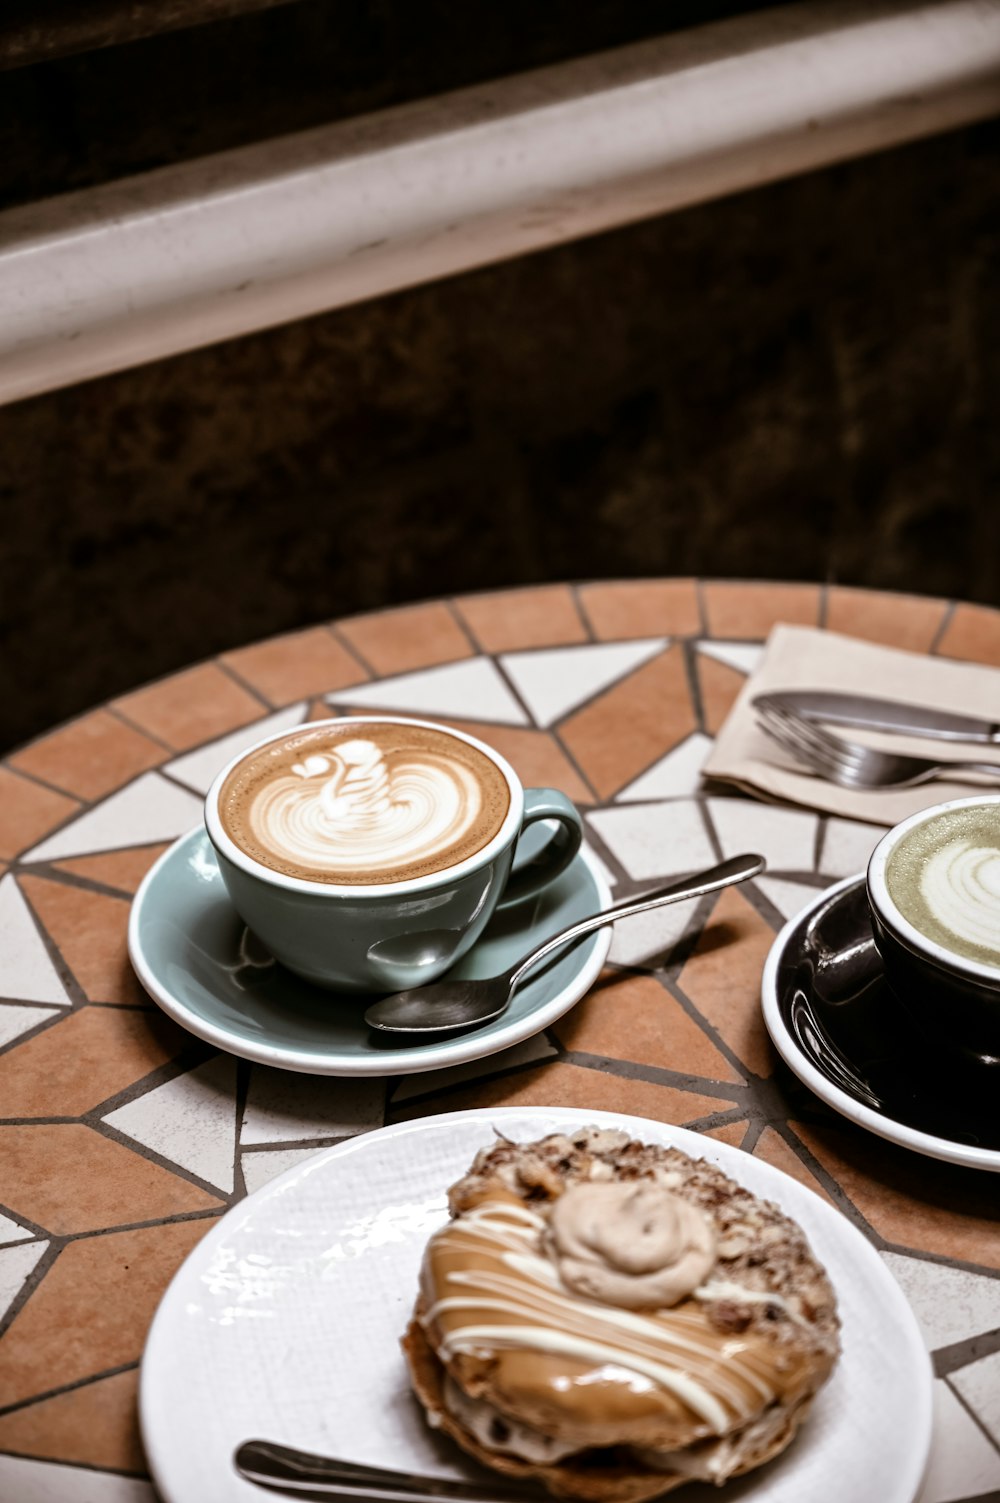 cappuccino in white ceramic cup on saucer beside stainless steel spoon on table